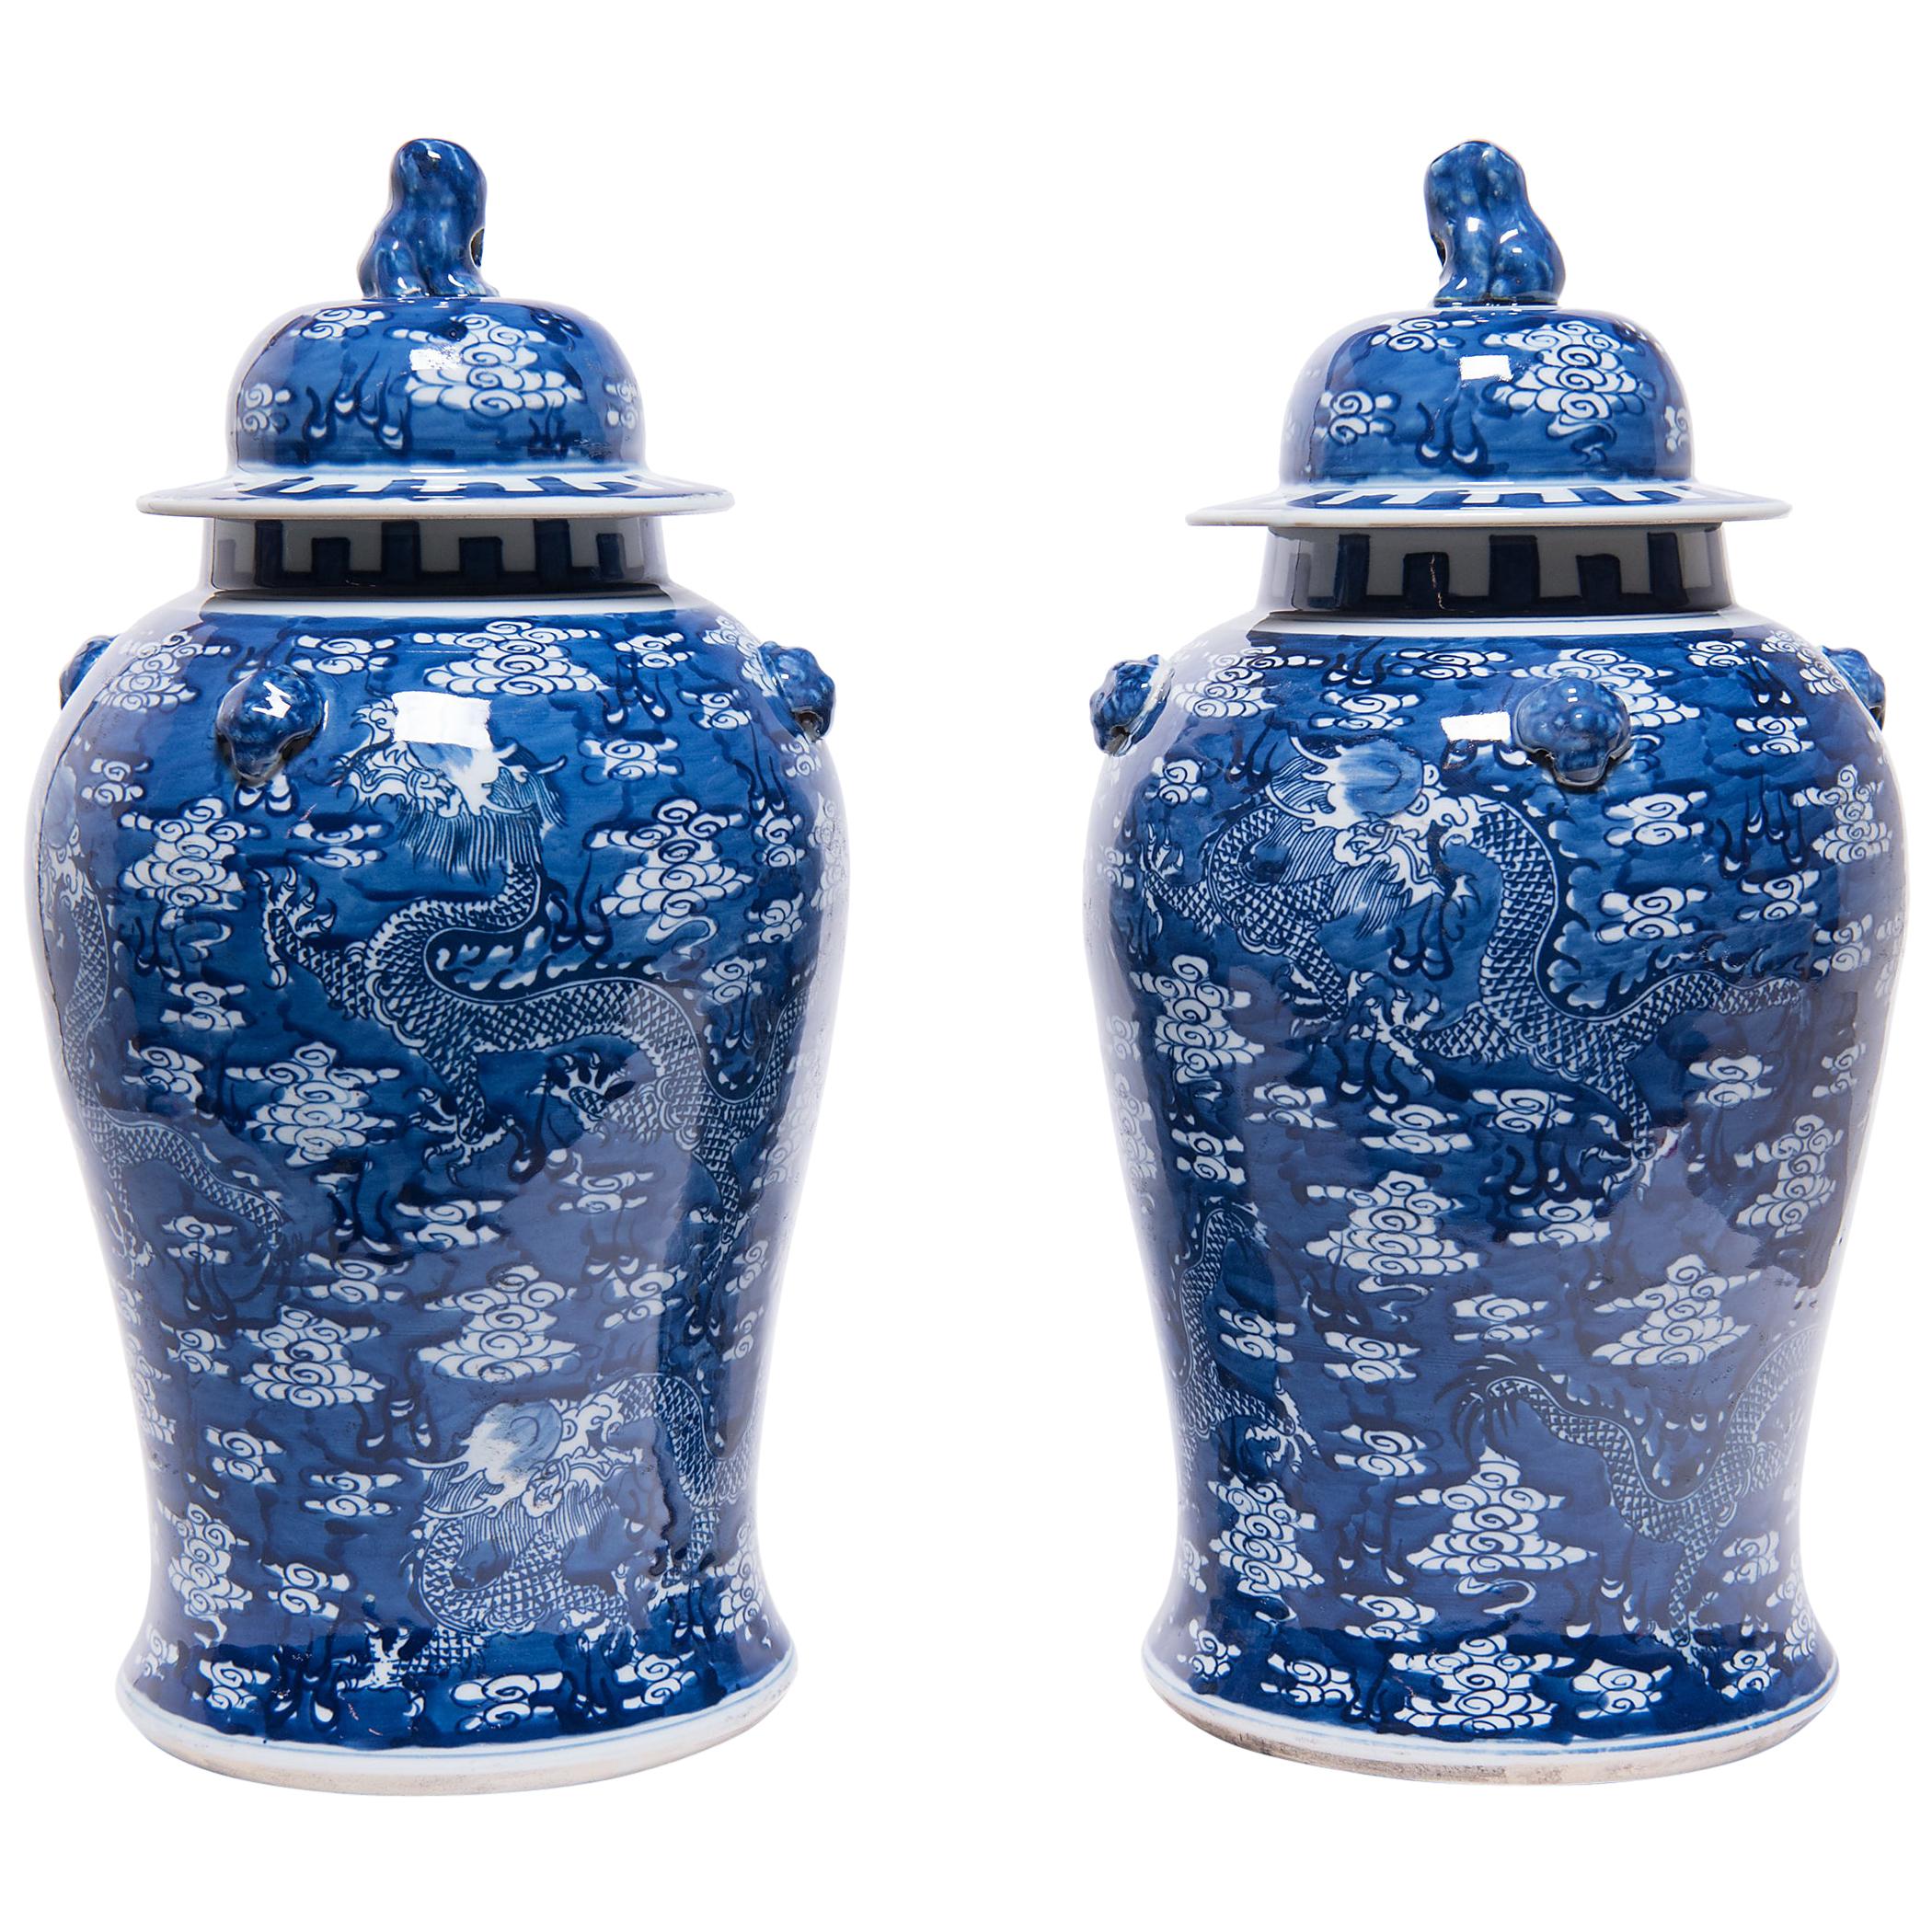 Pair of Blue and White Celestial Dragon Baluster Jars